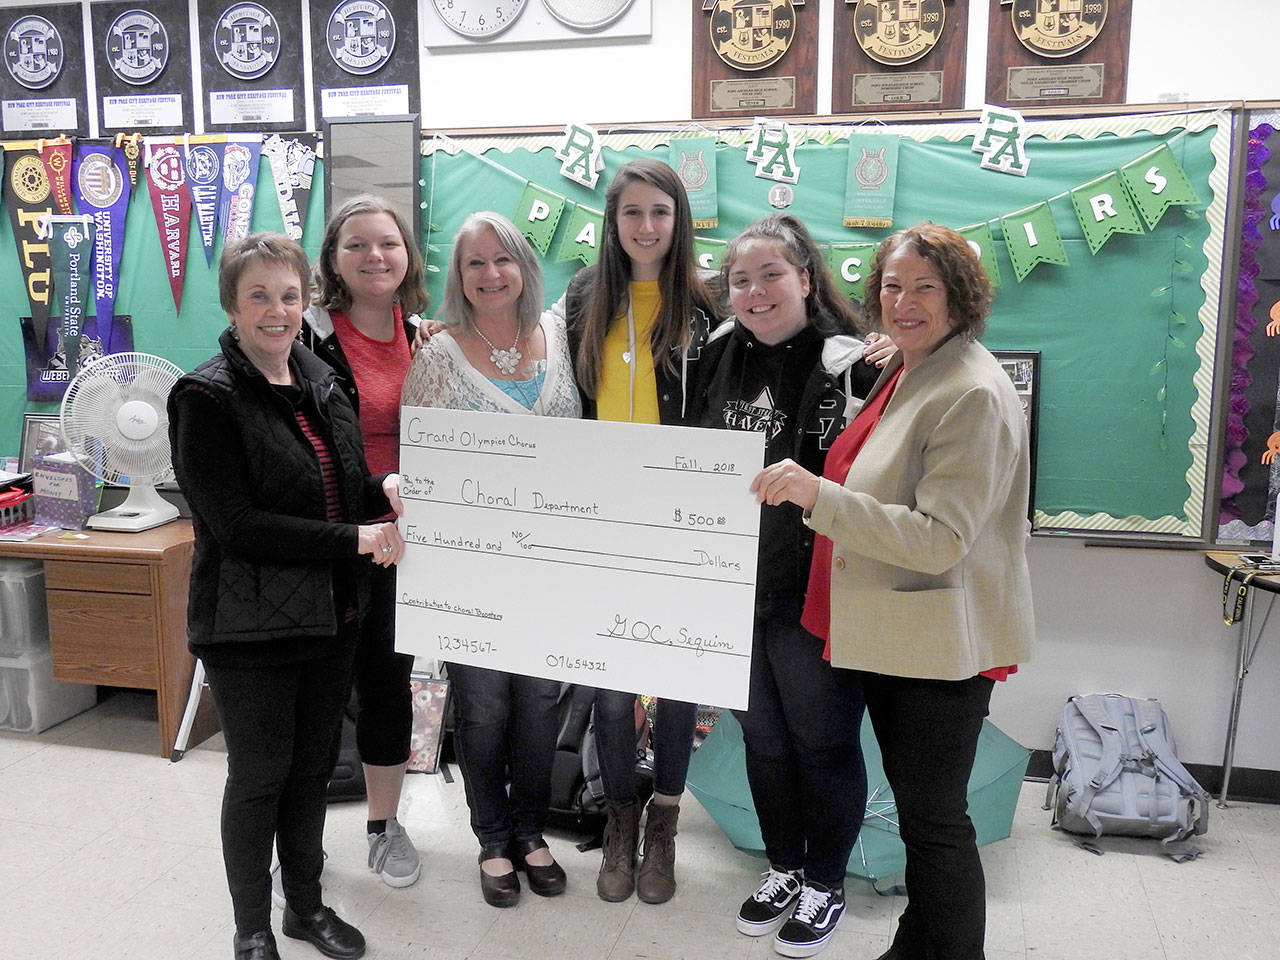 Grand Olympics Chorus recently presented the Port Angeles High School Chorus program with a $500 donation for their upcoming New York trip. Shown are Gay Lyn Lillagore, Trinadey Colville and director Jolene Gailey of Grand Olympics Chorus; Madelynne Jones and Kenzie Carney of Belle Voce Chorus; and Jean McDonald of Grand Olympics Chorus.